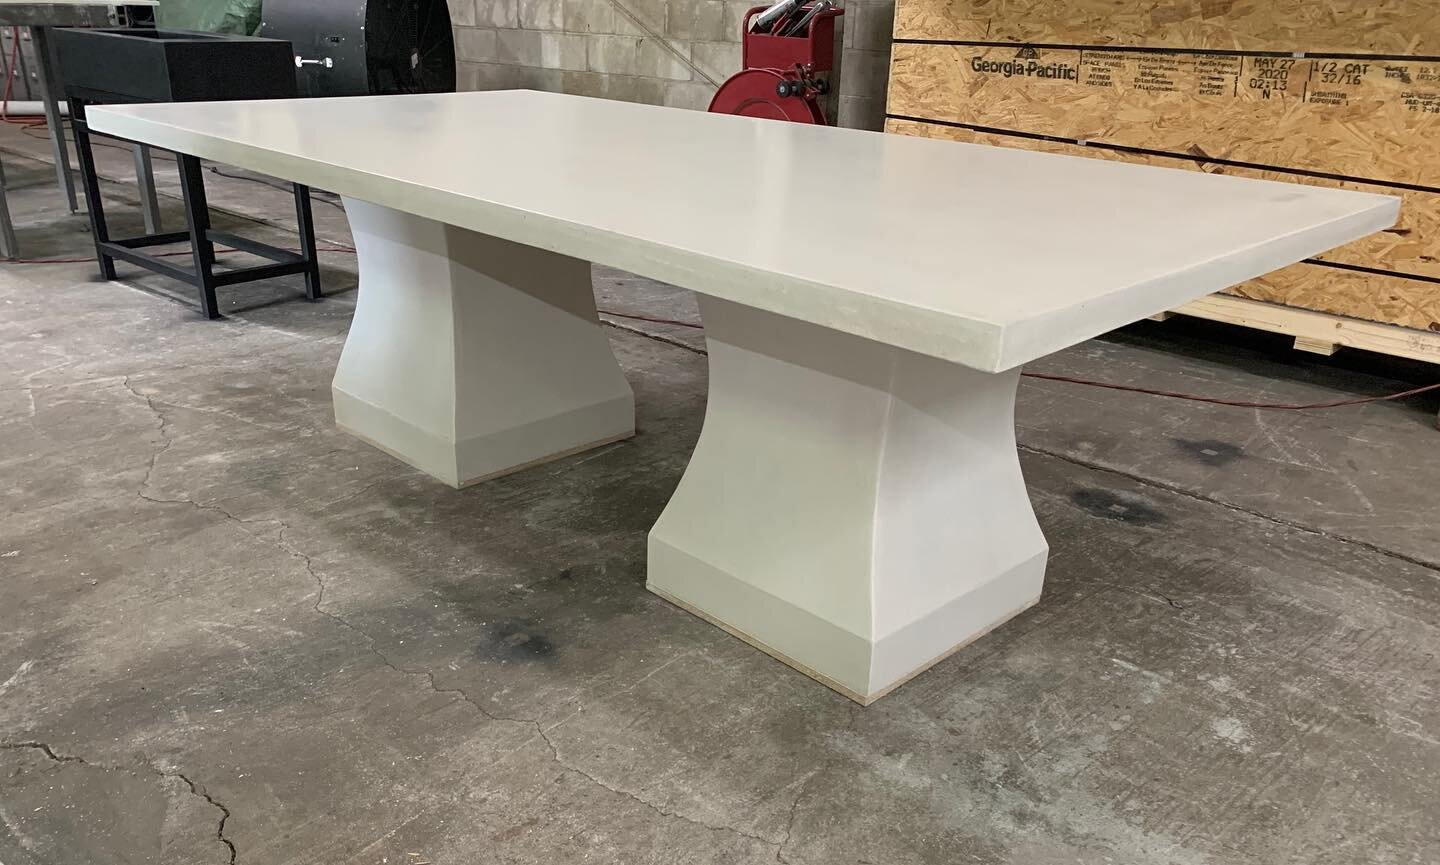 Gorgeous #custom 96&rdquo; white concrete dining table shipping out just in time for the holidays!
#customfurniture #indooroutdoorfurniture #concretetable #diningtable #modernfarmhouse #moderntable #customtable #pedestaltable #concretedesign #stogsco